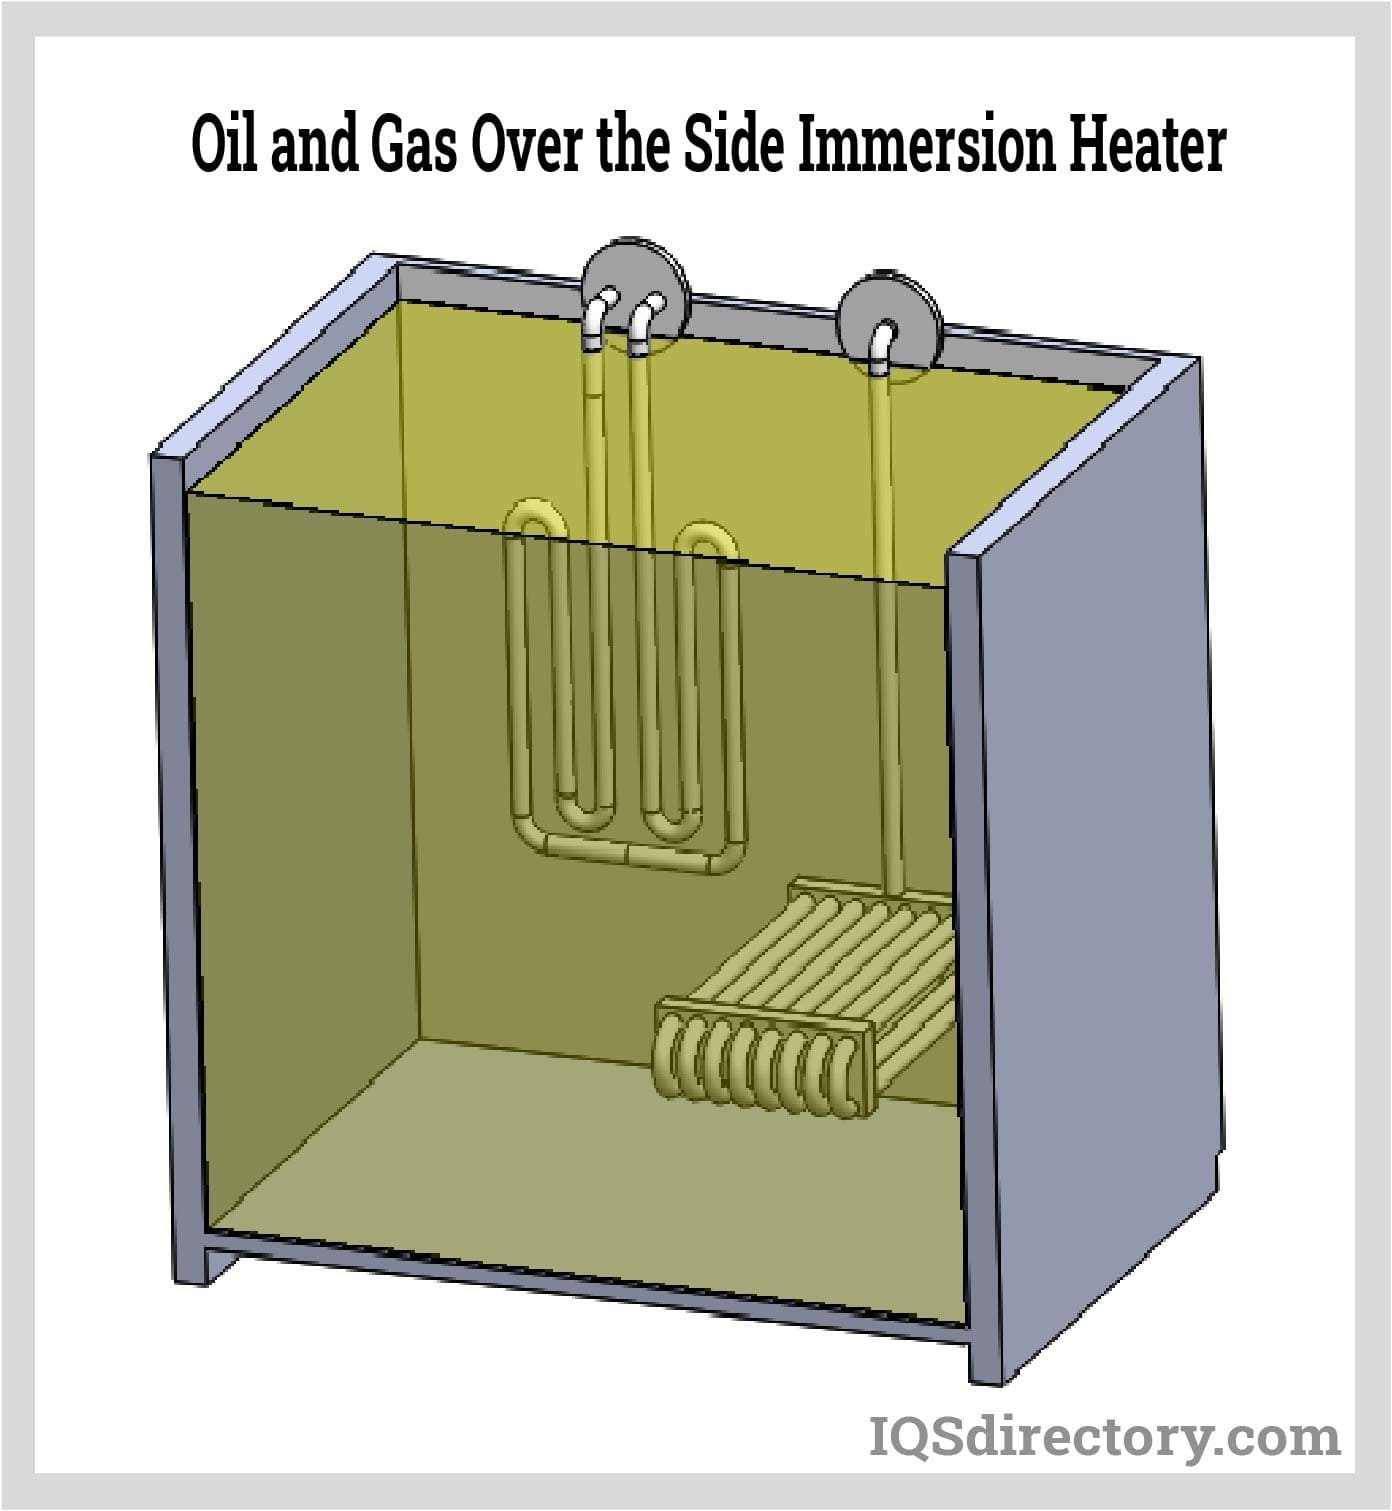 Oil and Gas Over the Side Immersion Heater